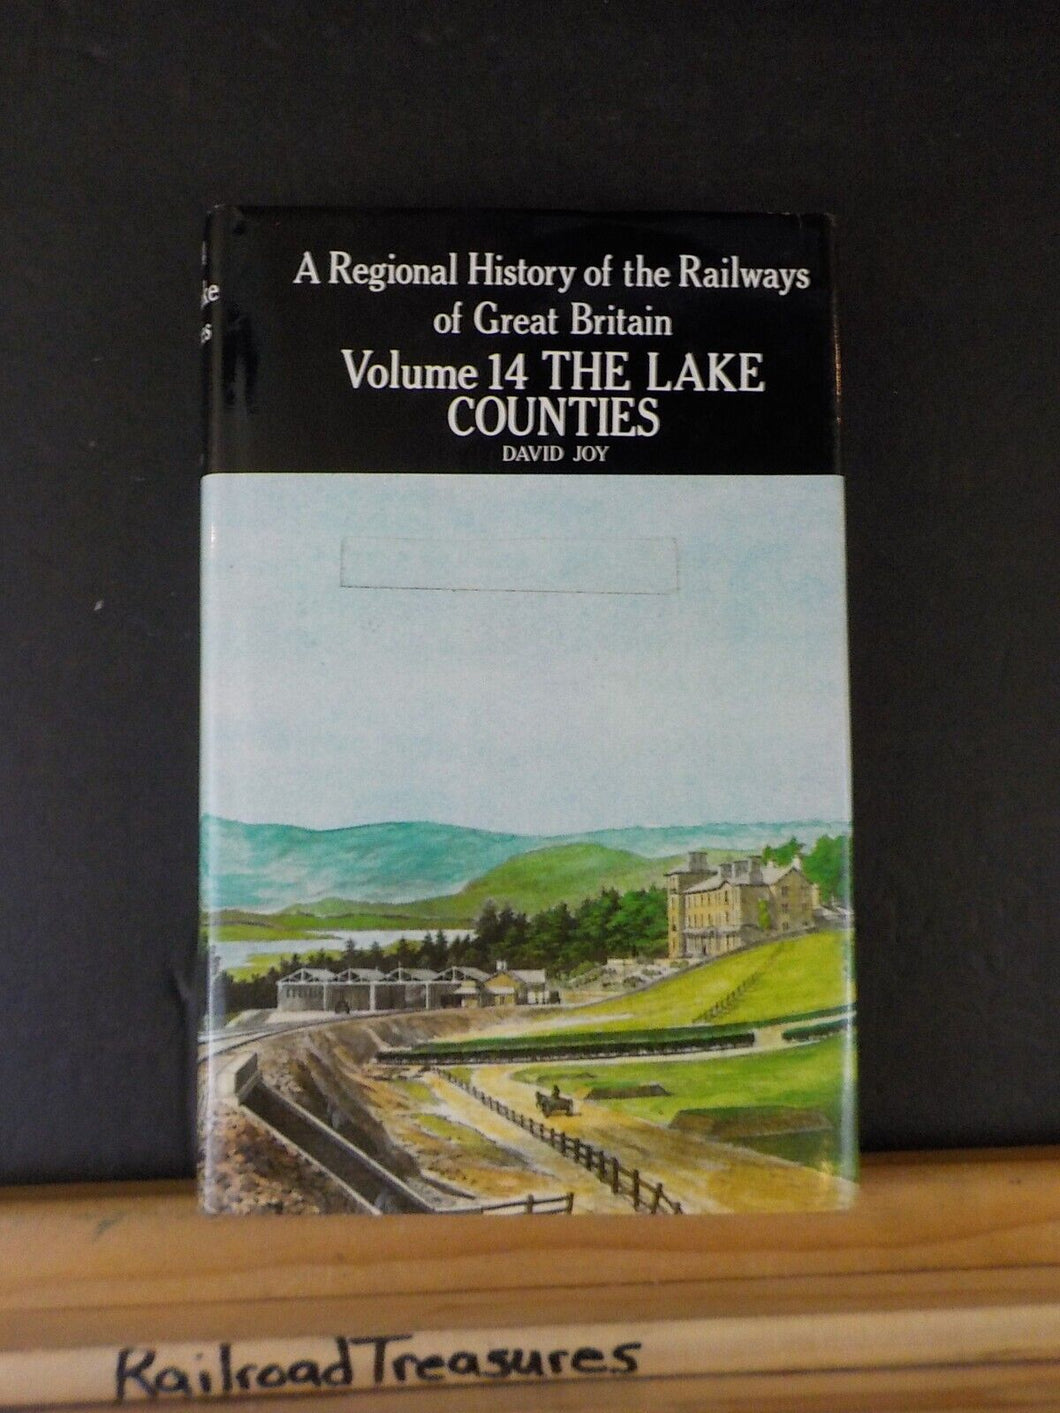 Regional History of the Railways of Great Britain Volume 14 The Lake Counties